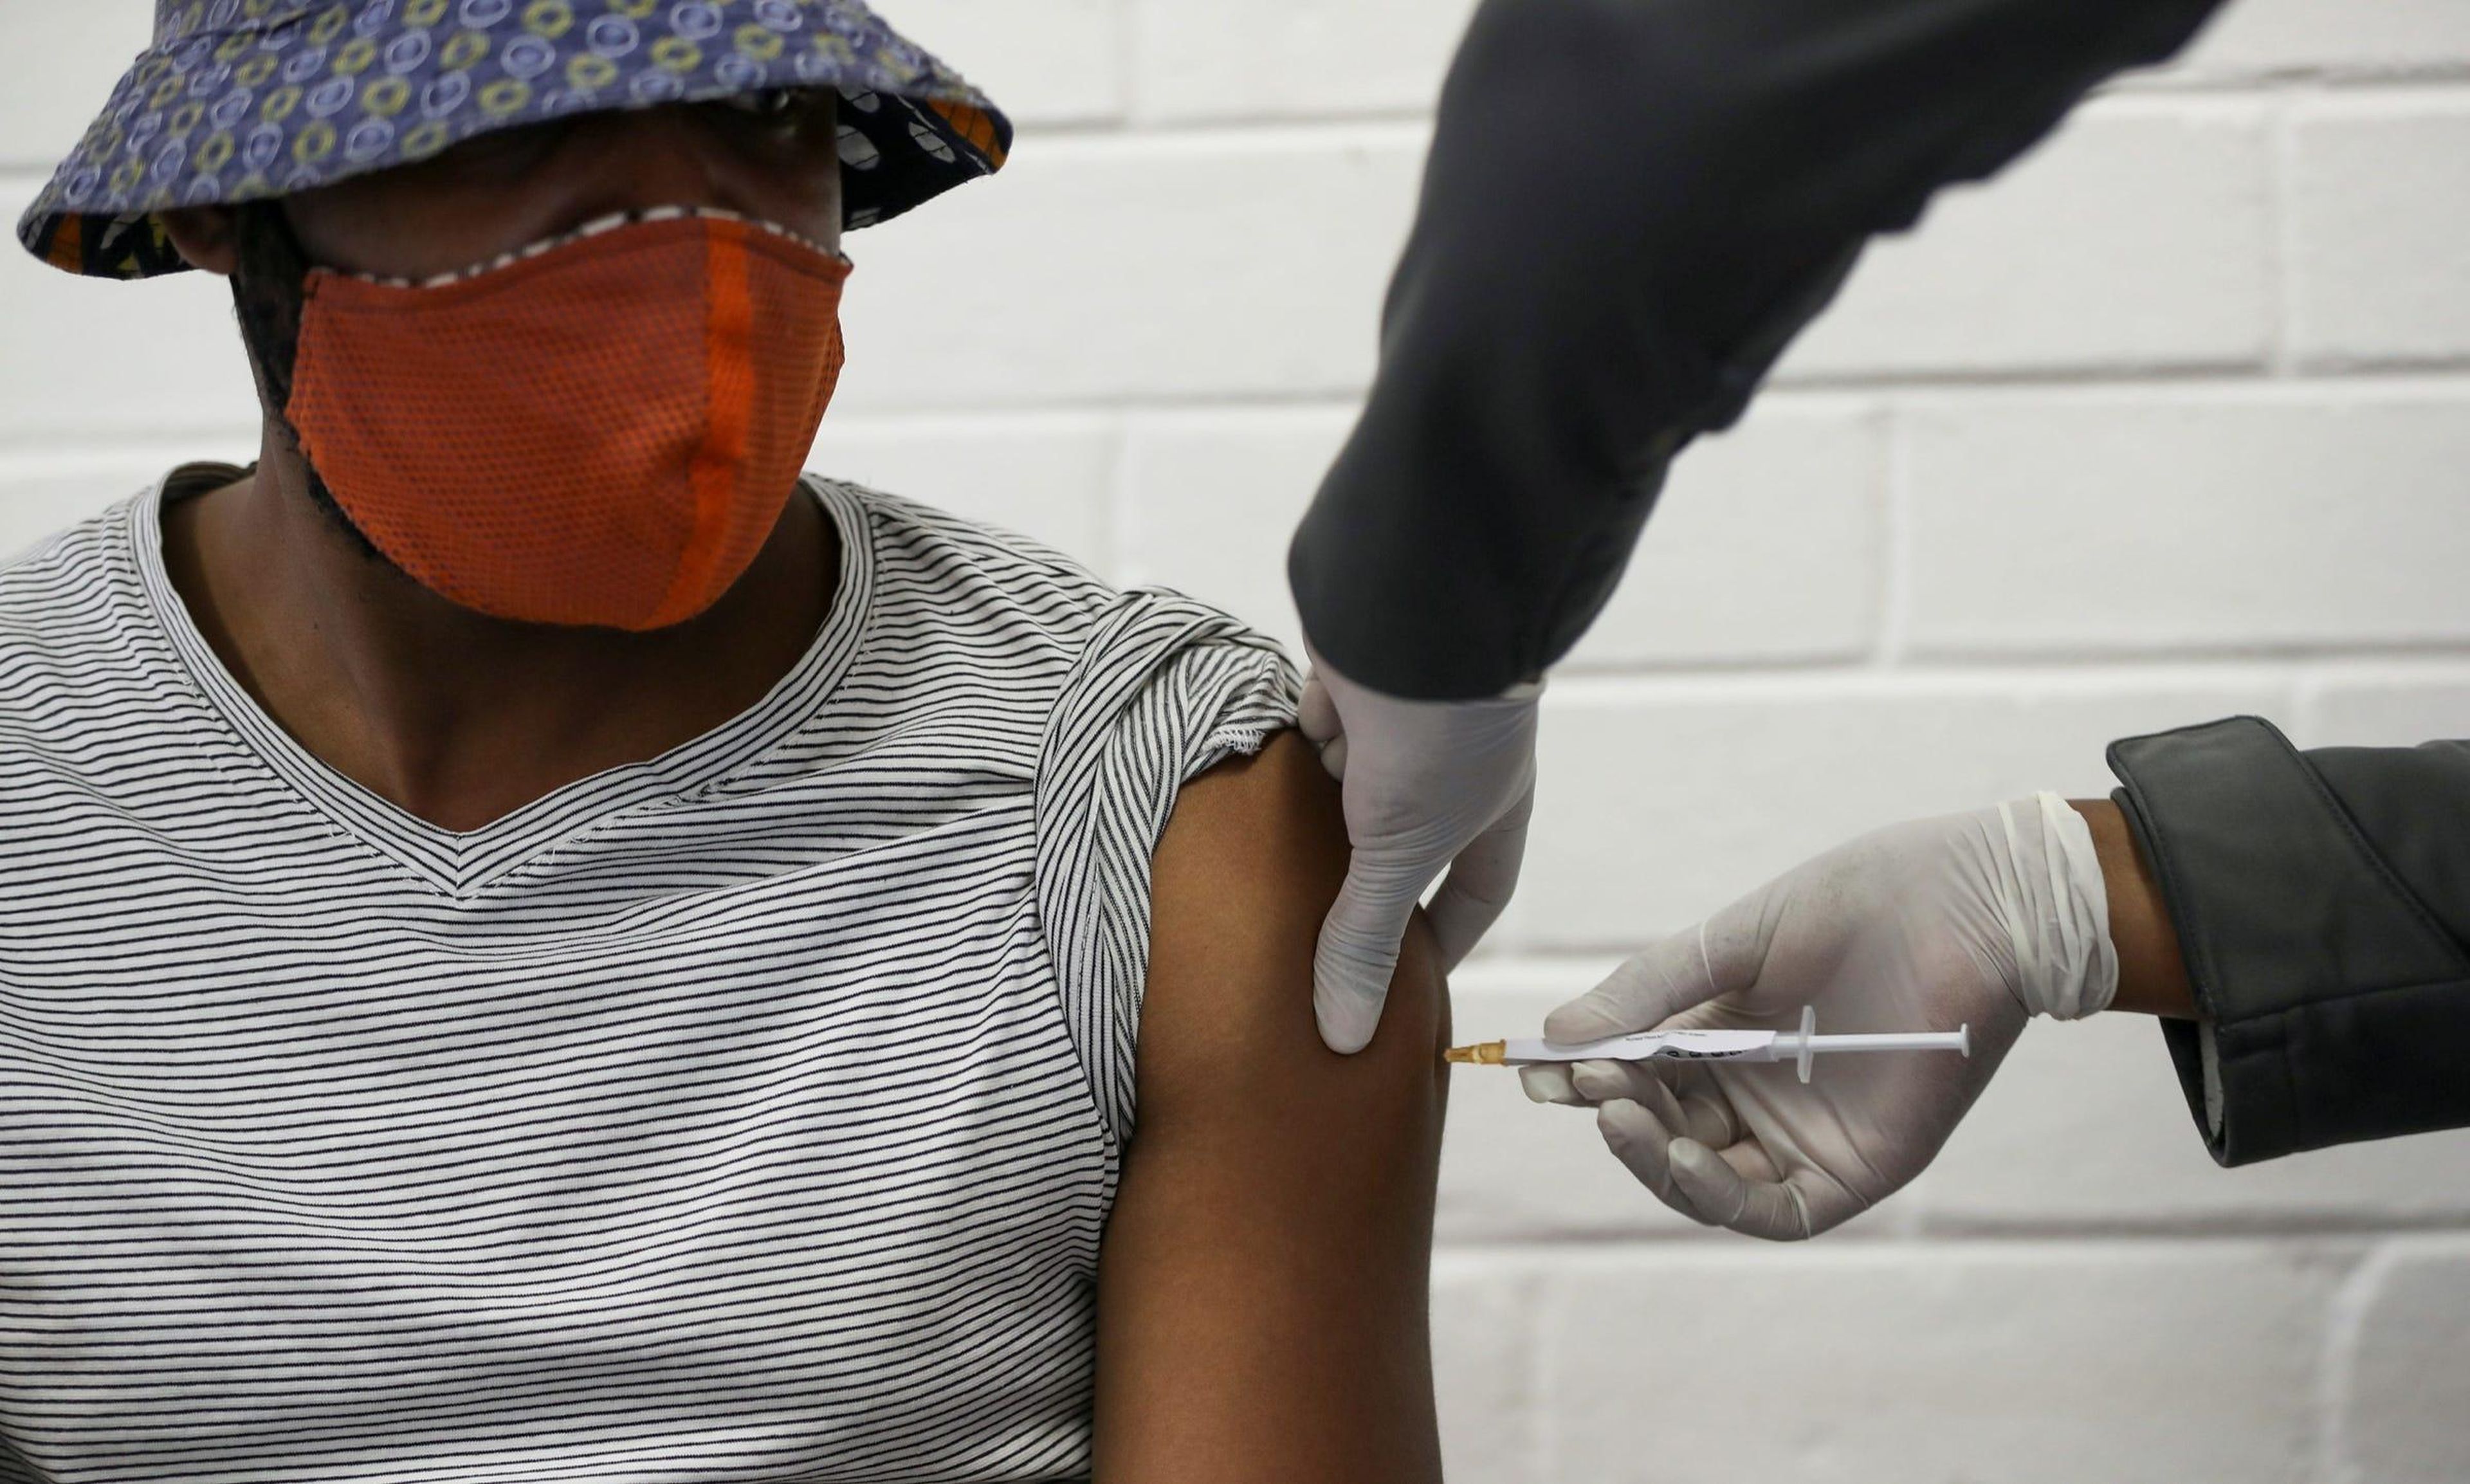 A volunteer receives an experimental coronavirus shot from a medical worker at Baragwanath Hospital in Soweto, South Africa, June 24, 2020.